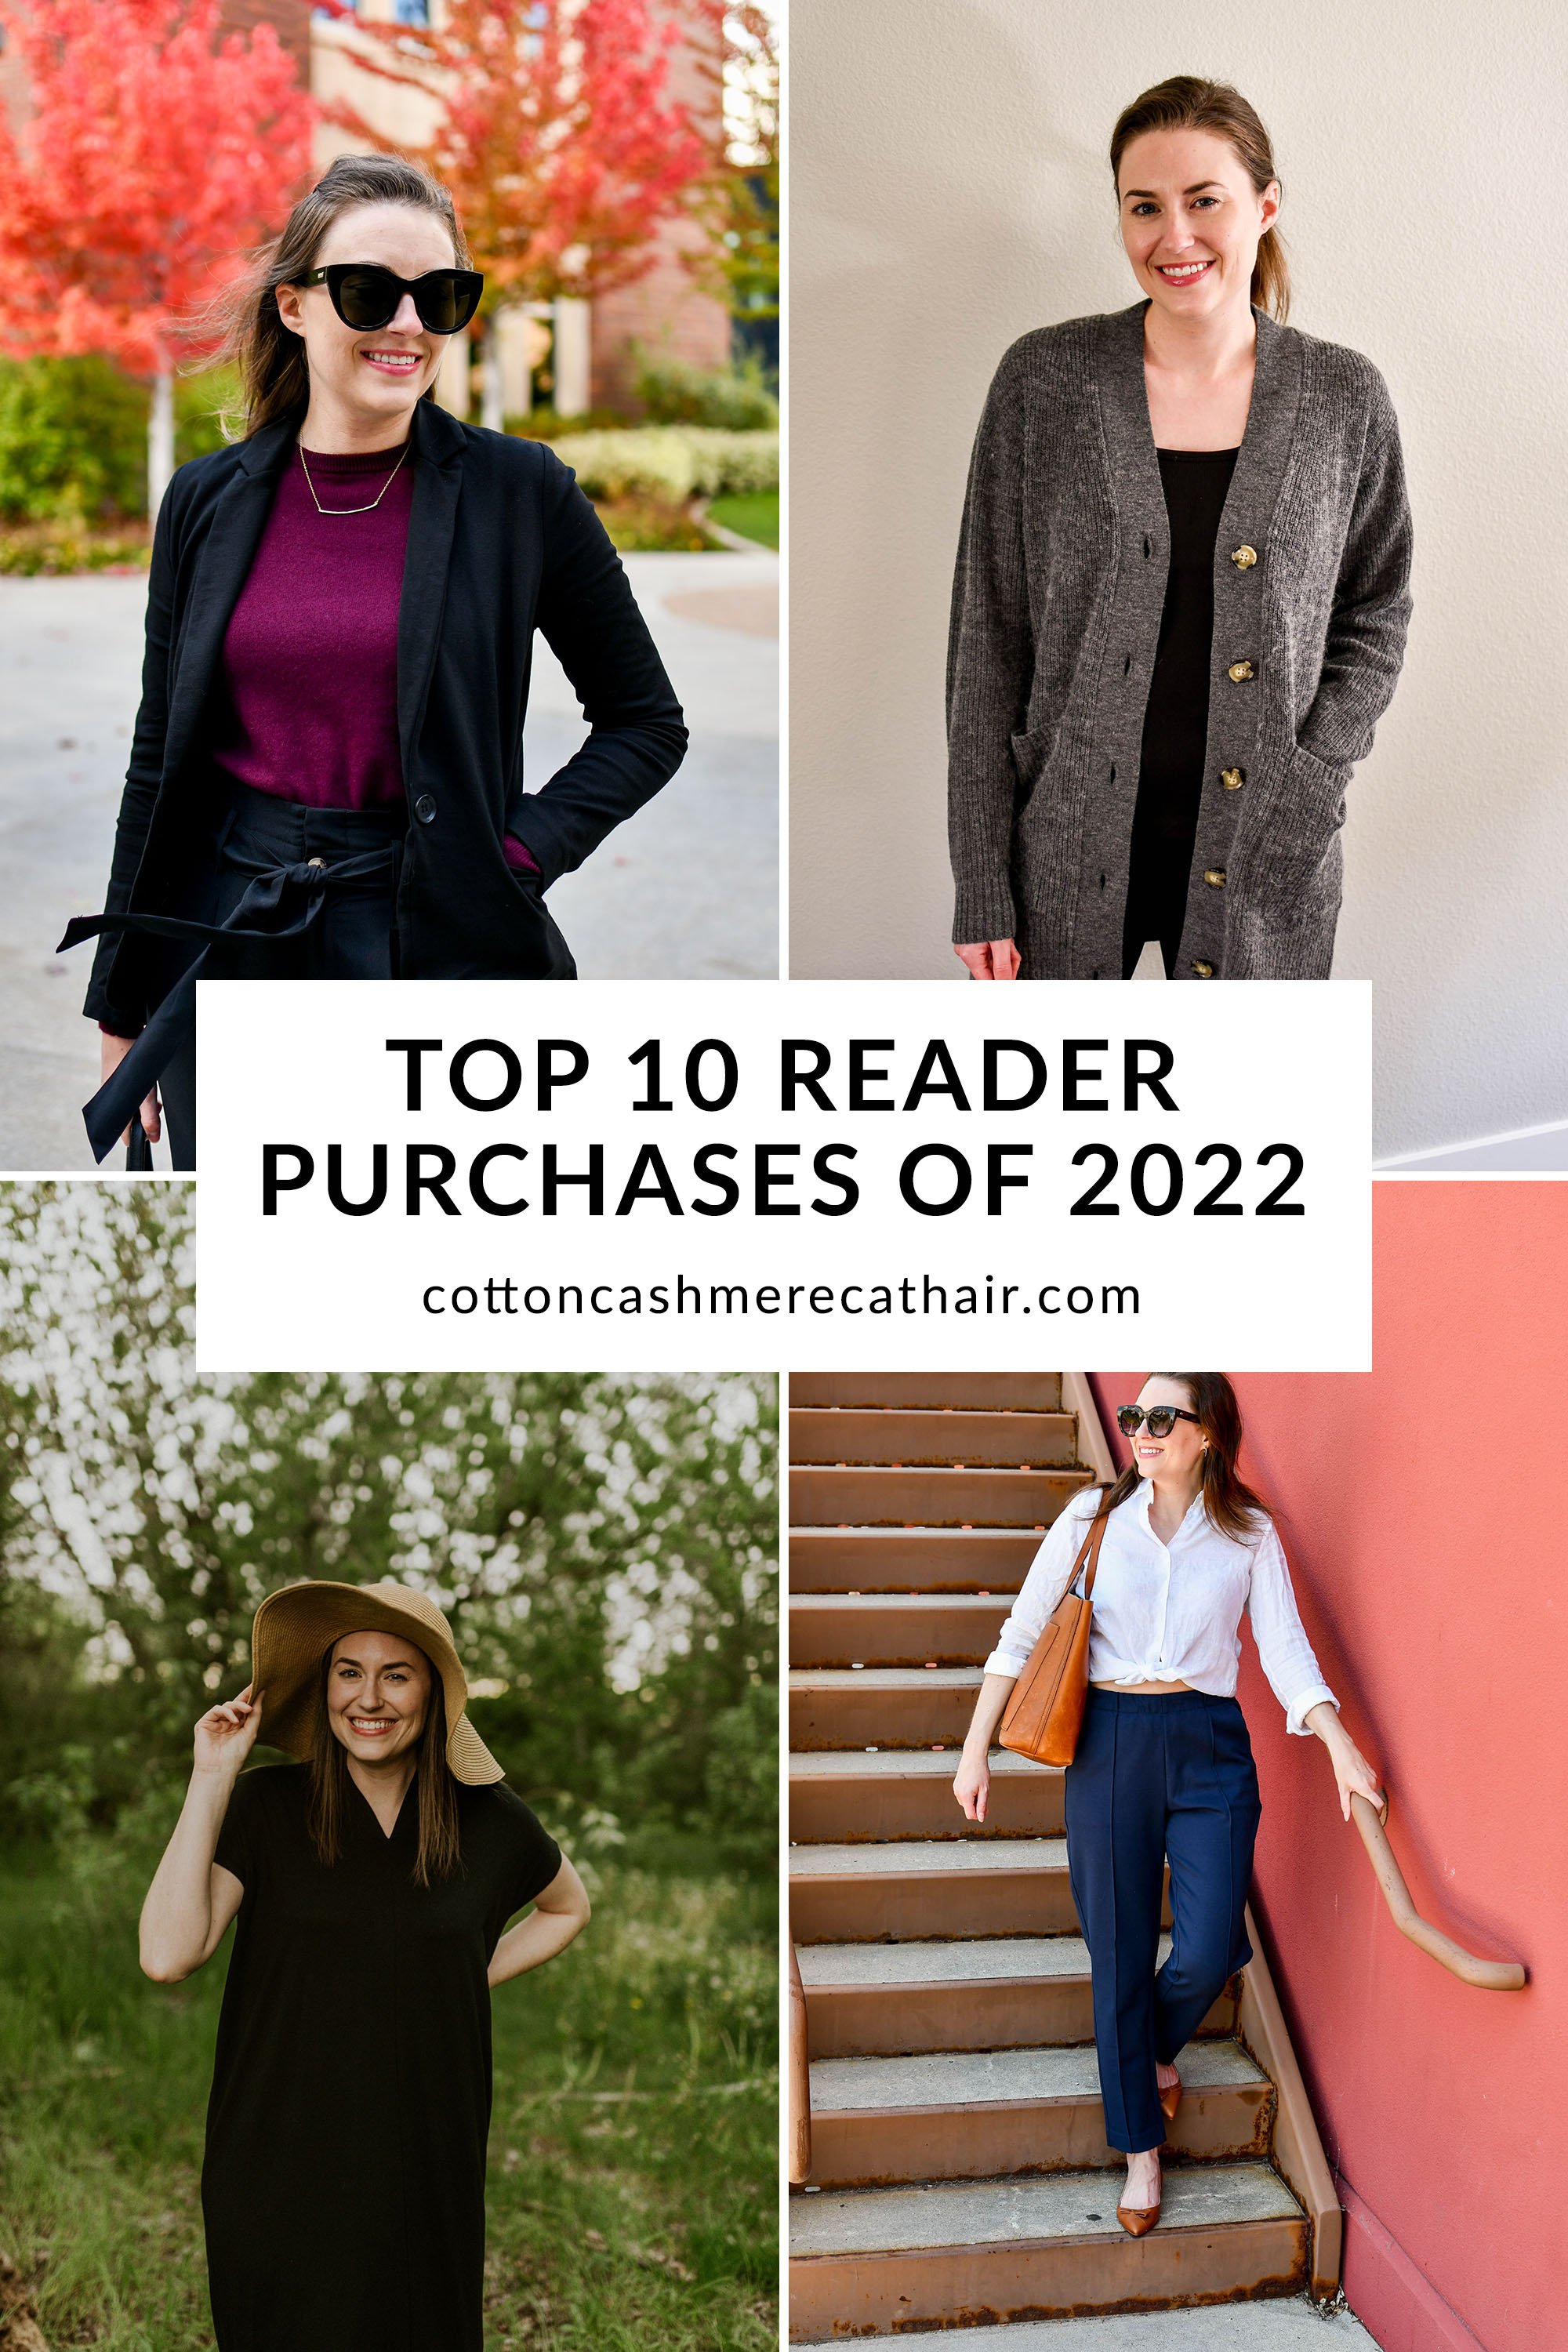 Top 10 CCCH Reader Purchases of 2022